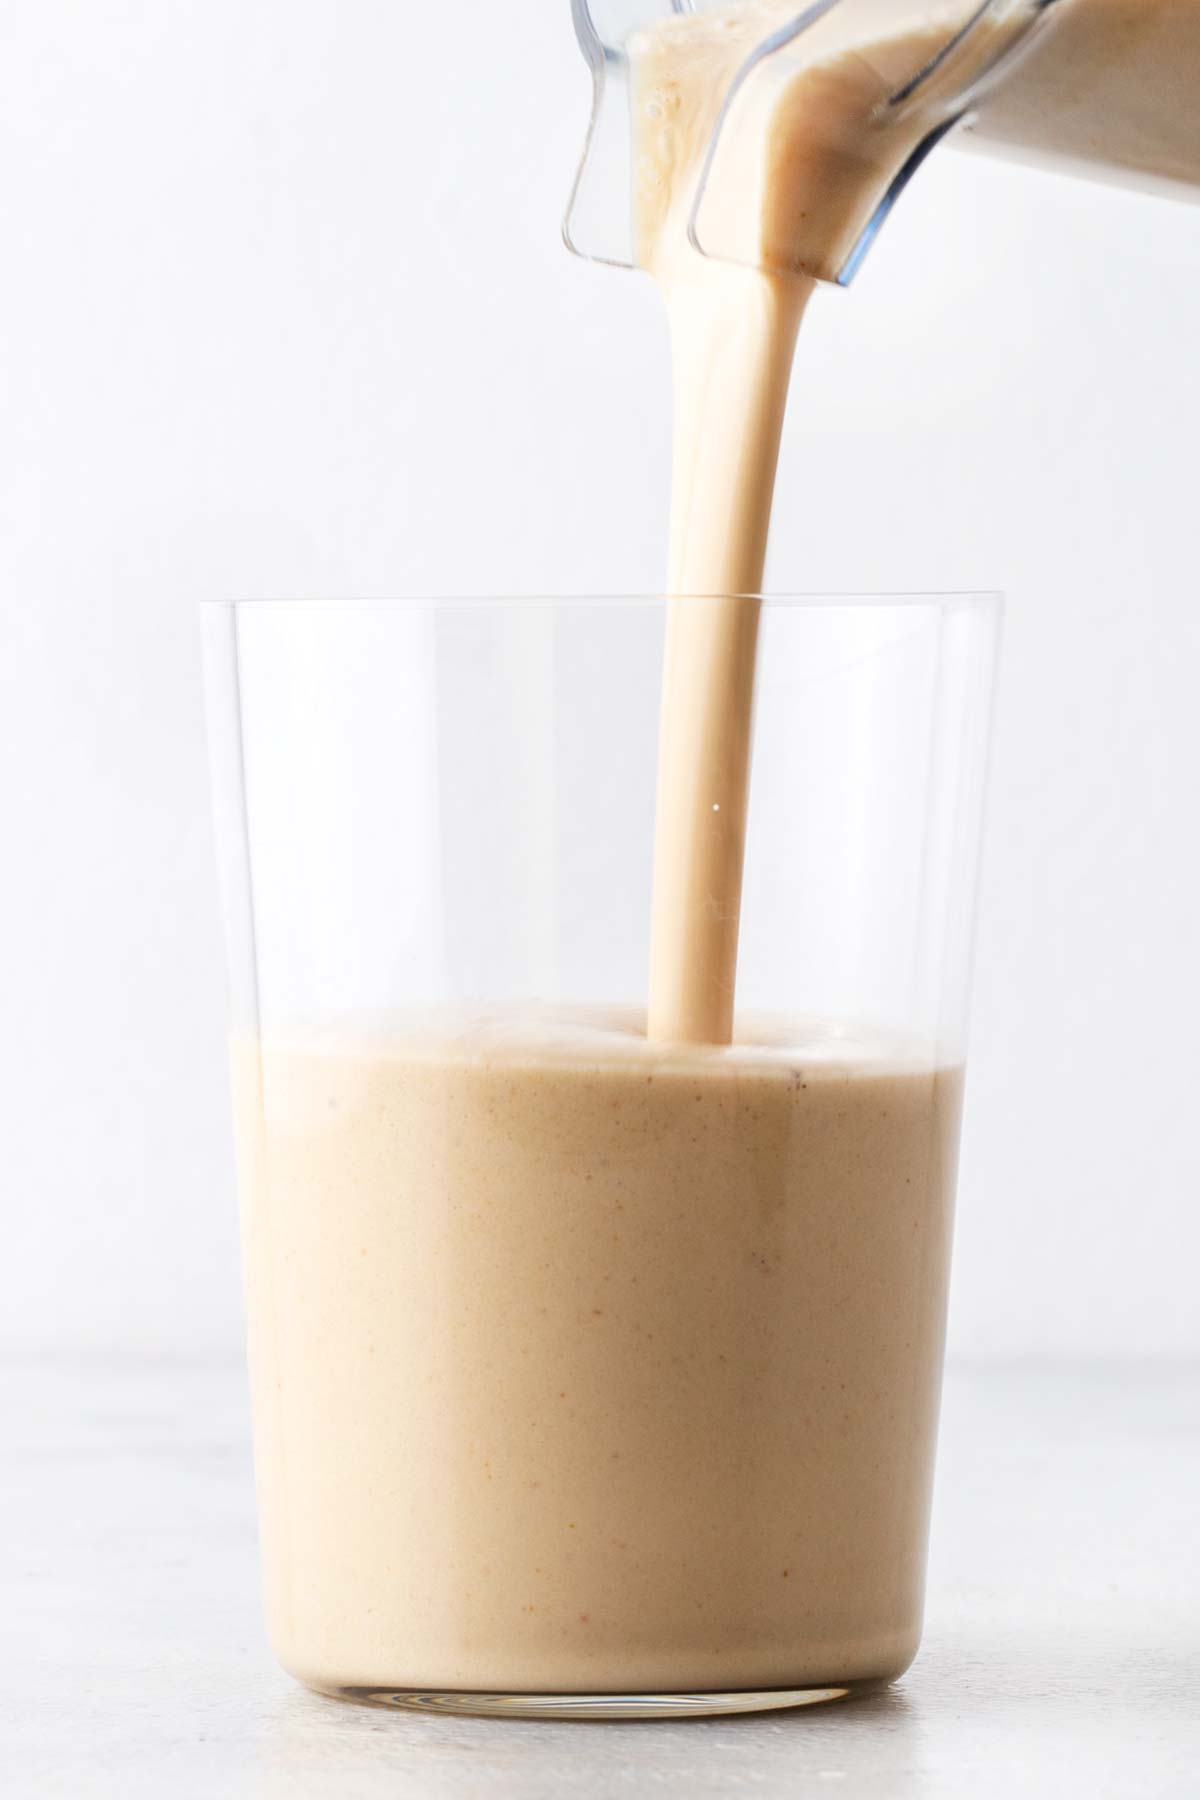 Peanut butter banana protein shake in a glass.